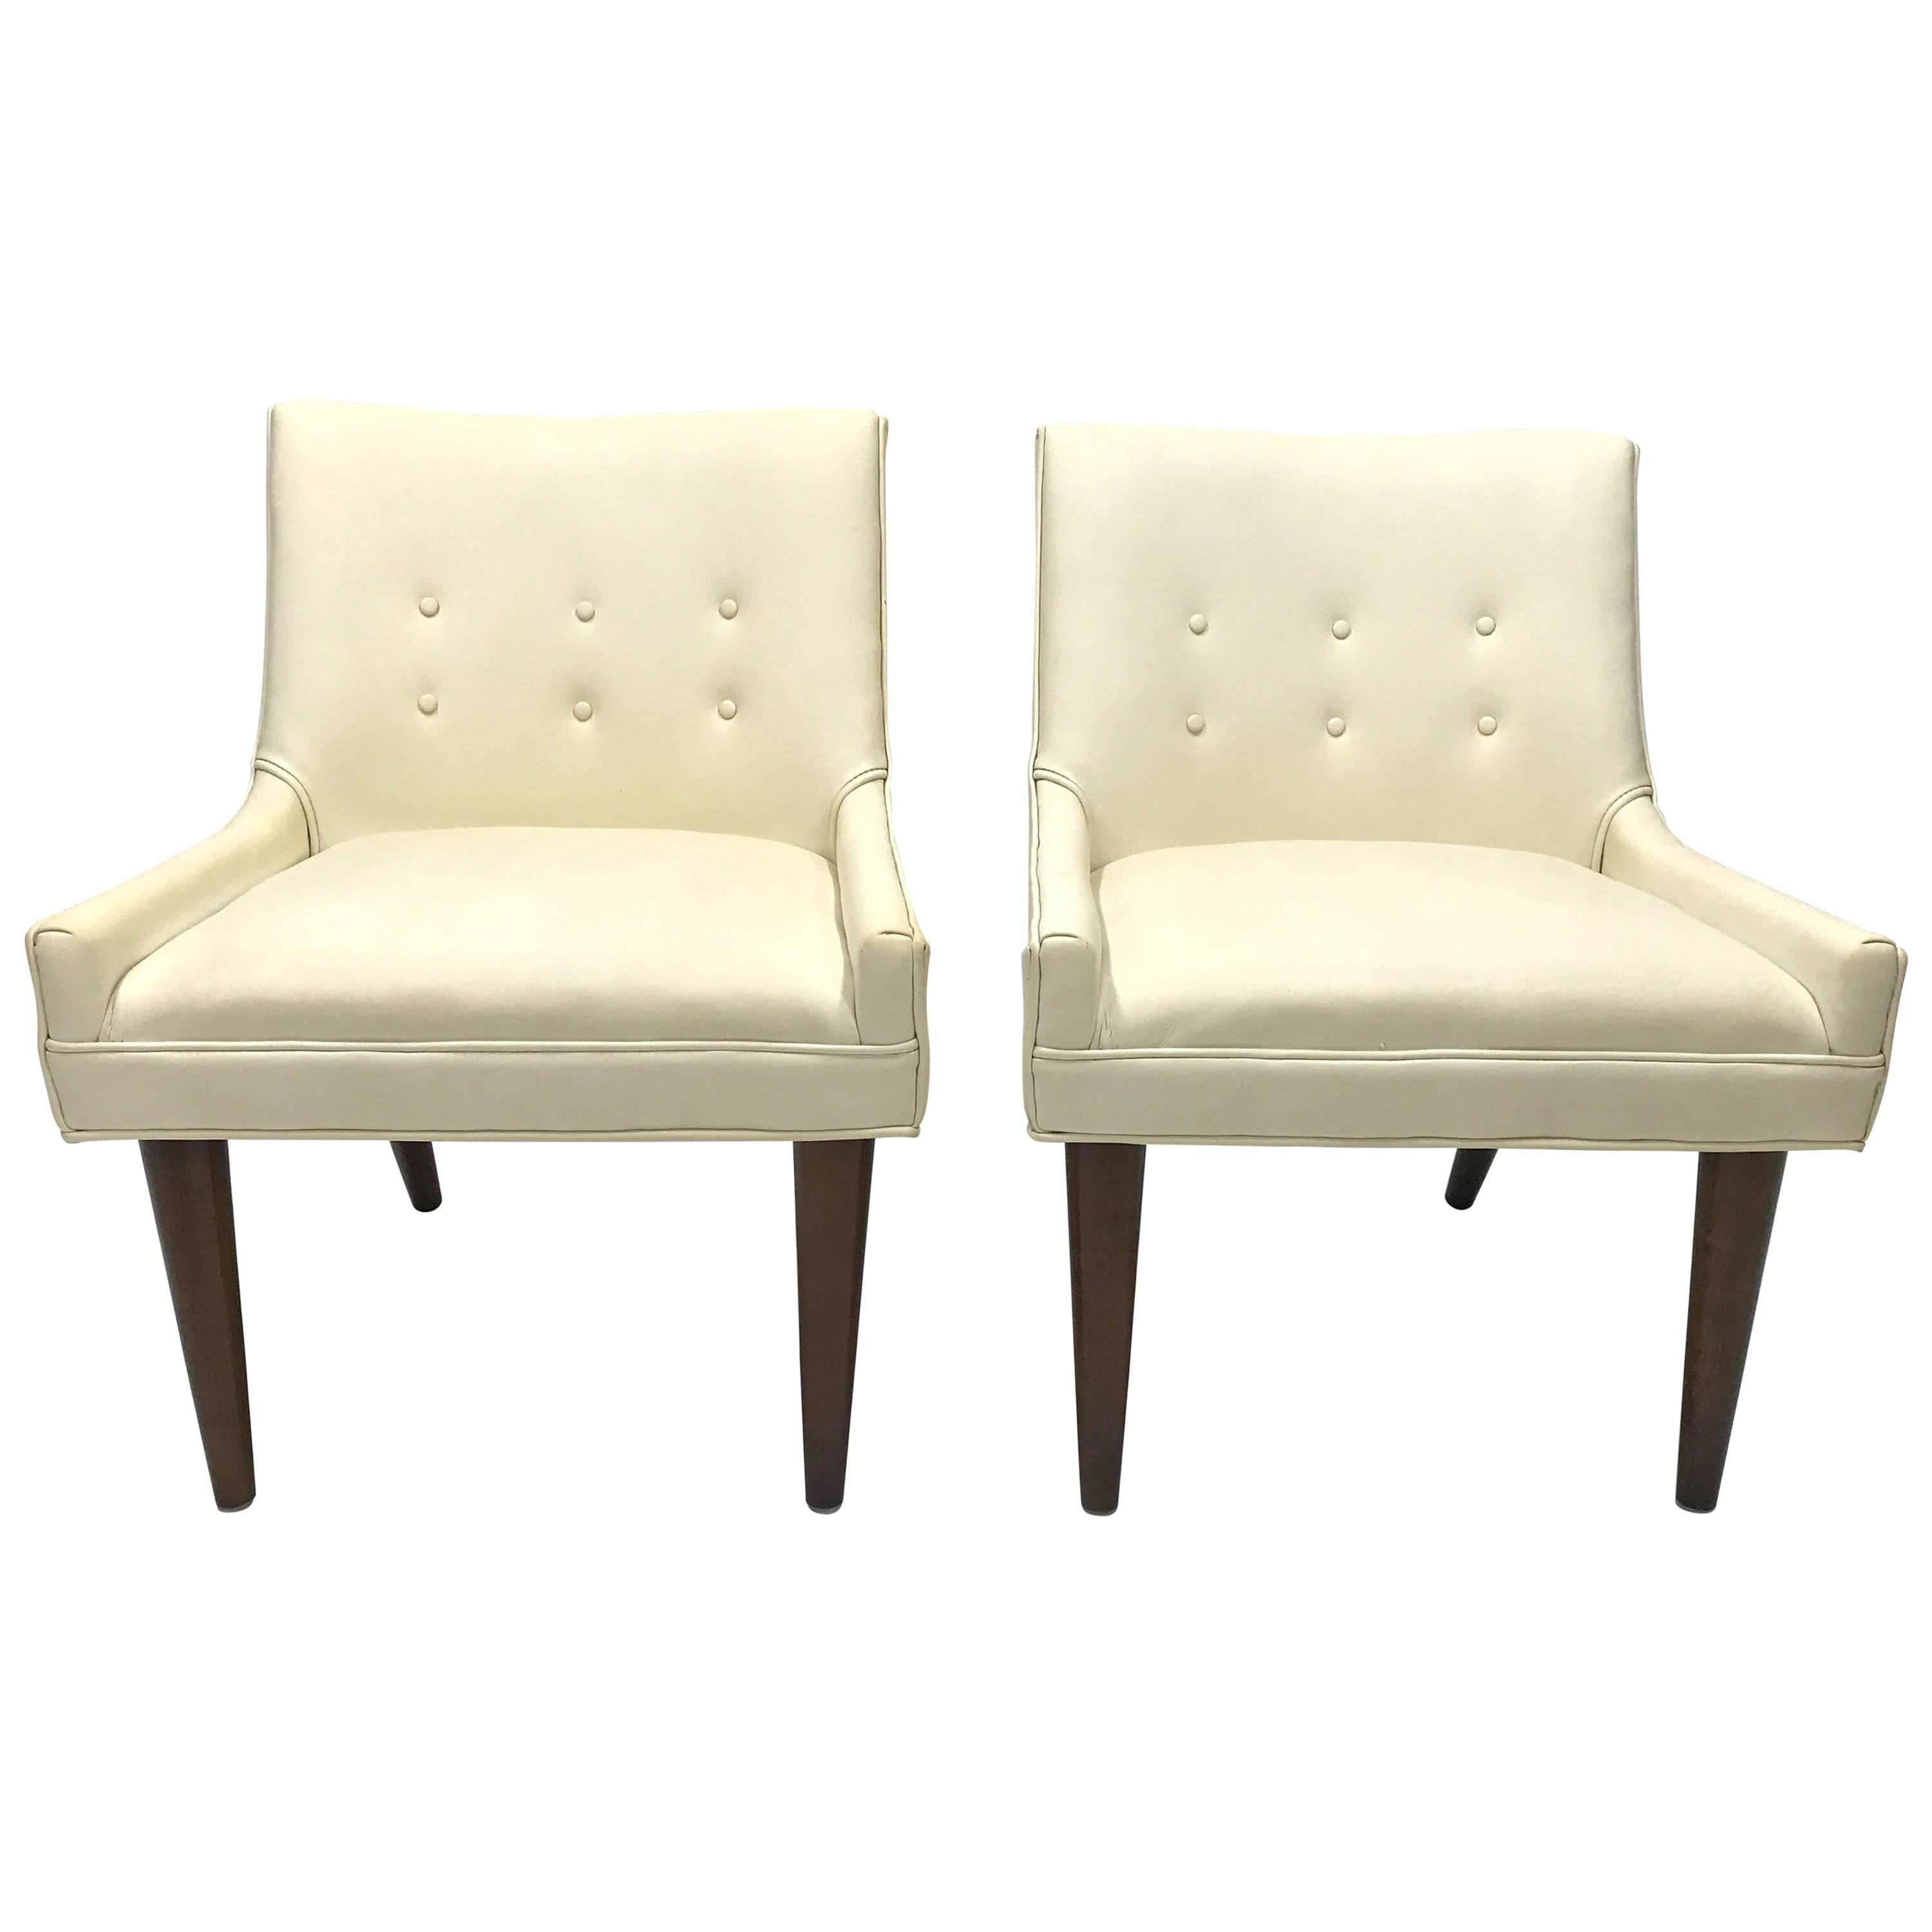 Pair of Slipper Chairs in the Manner of Milo Baughman for Thayer Coggin